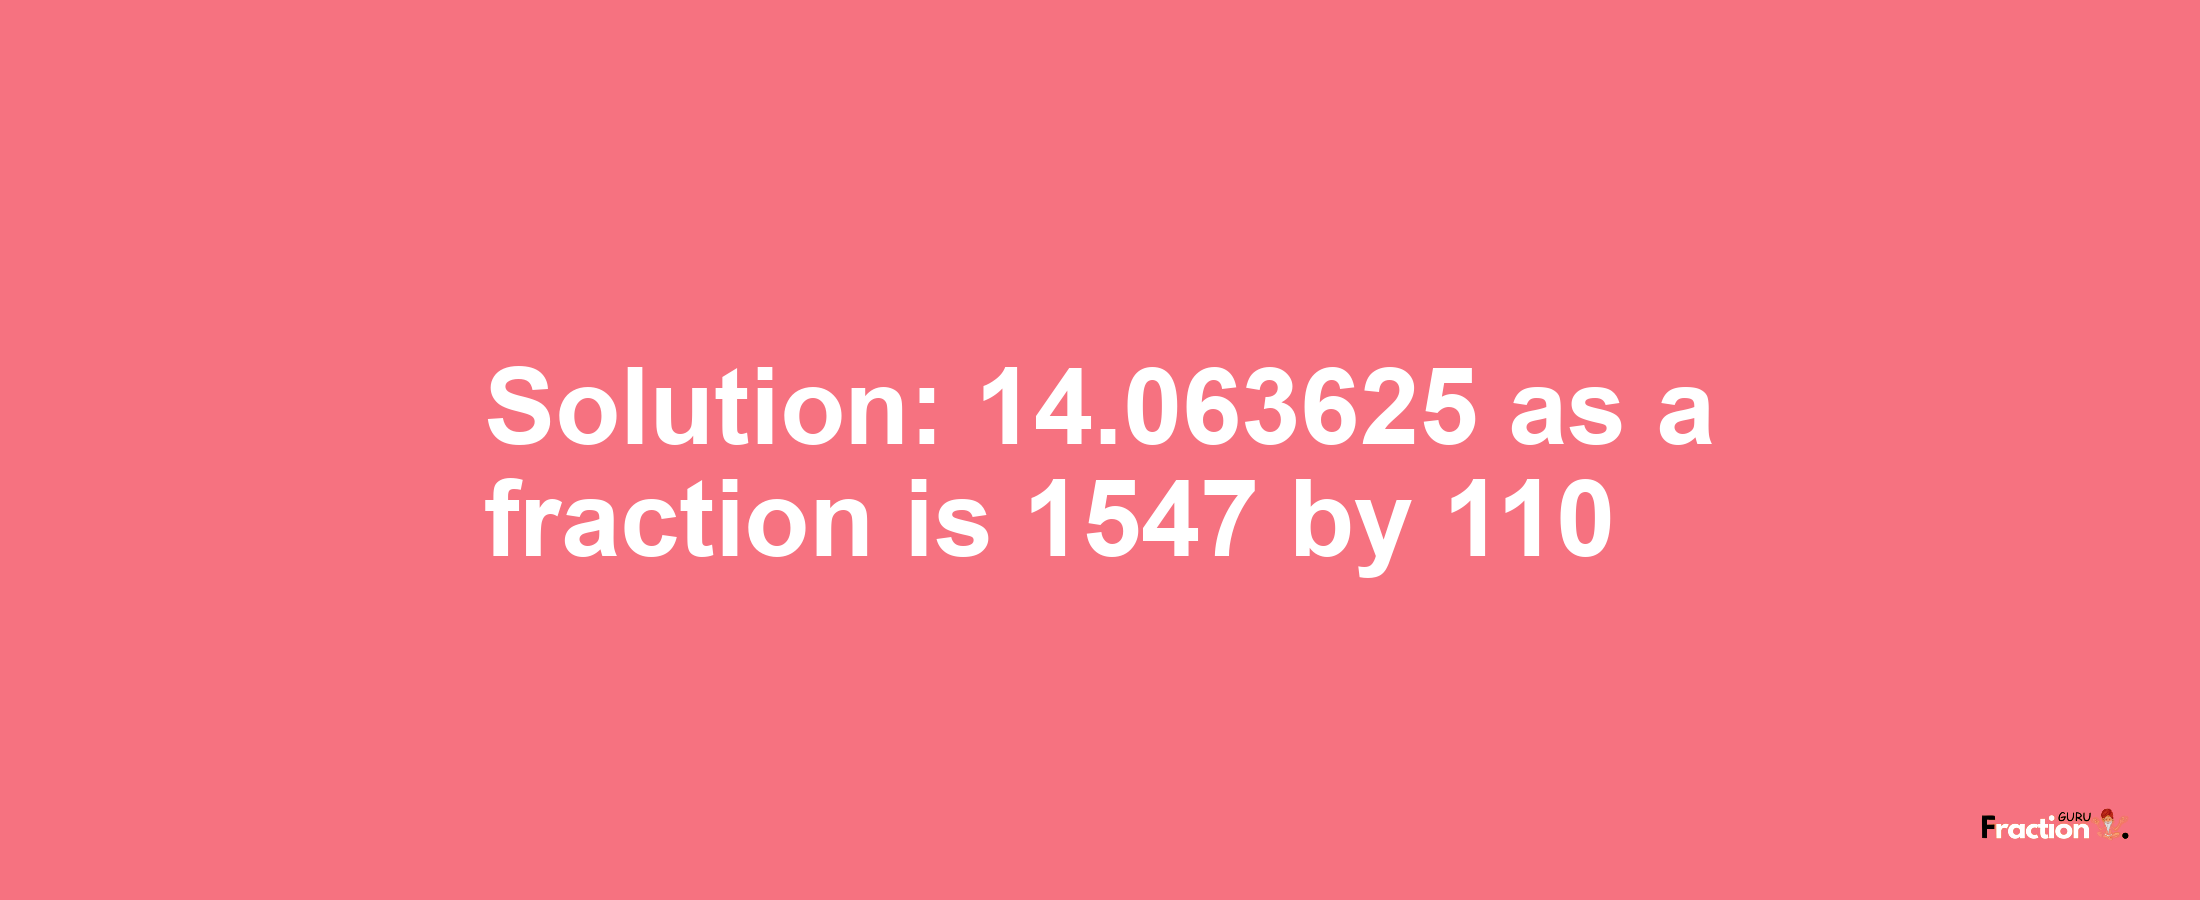 Solution:14.063625 as a fraction is 1547/110